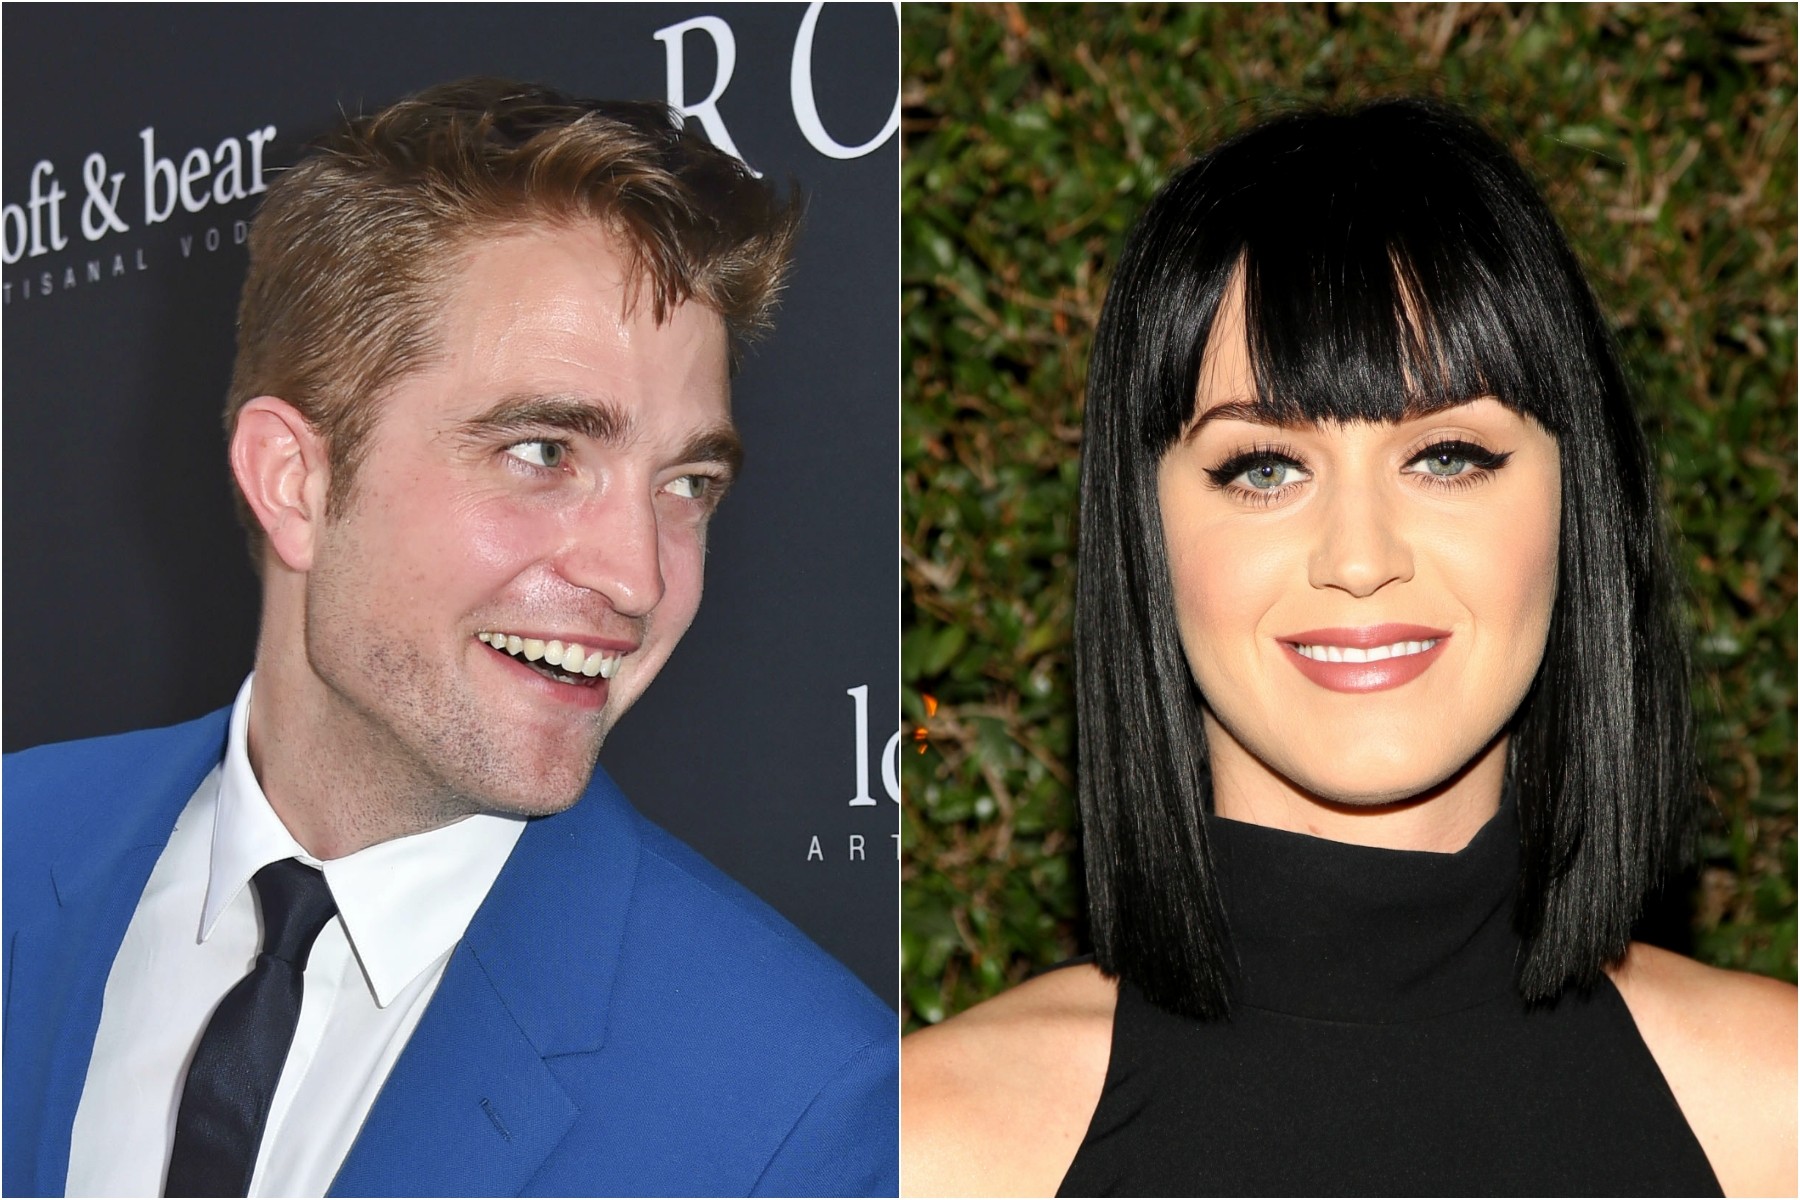 Robert Pattinson e Katy Perry. (Foto: Getty Images)